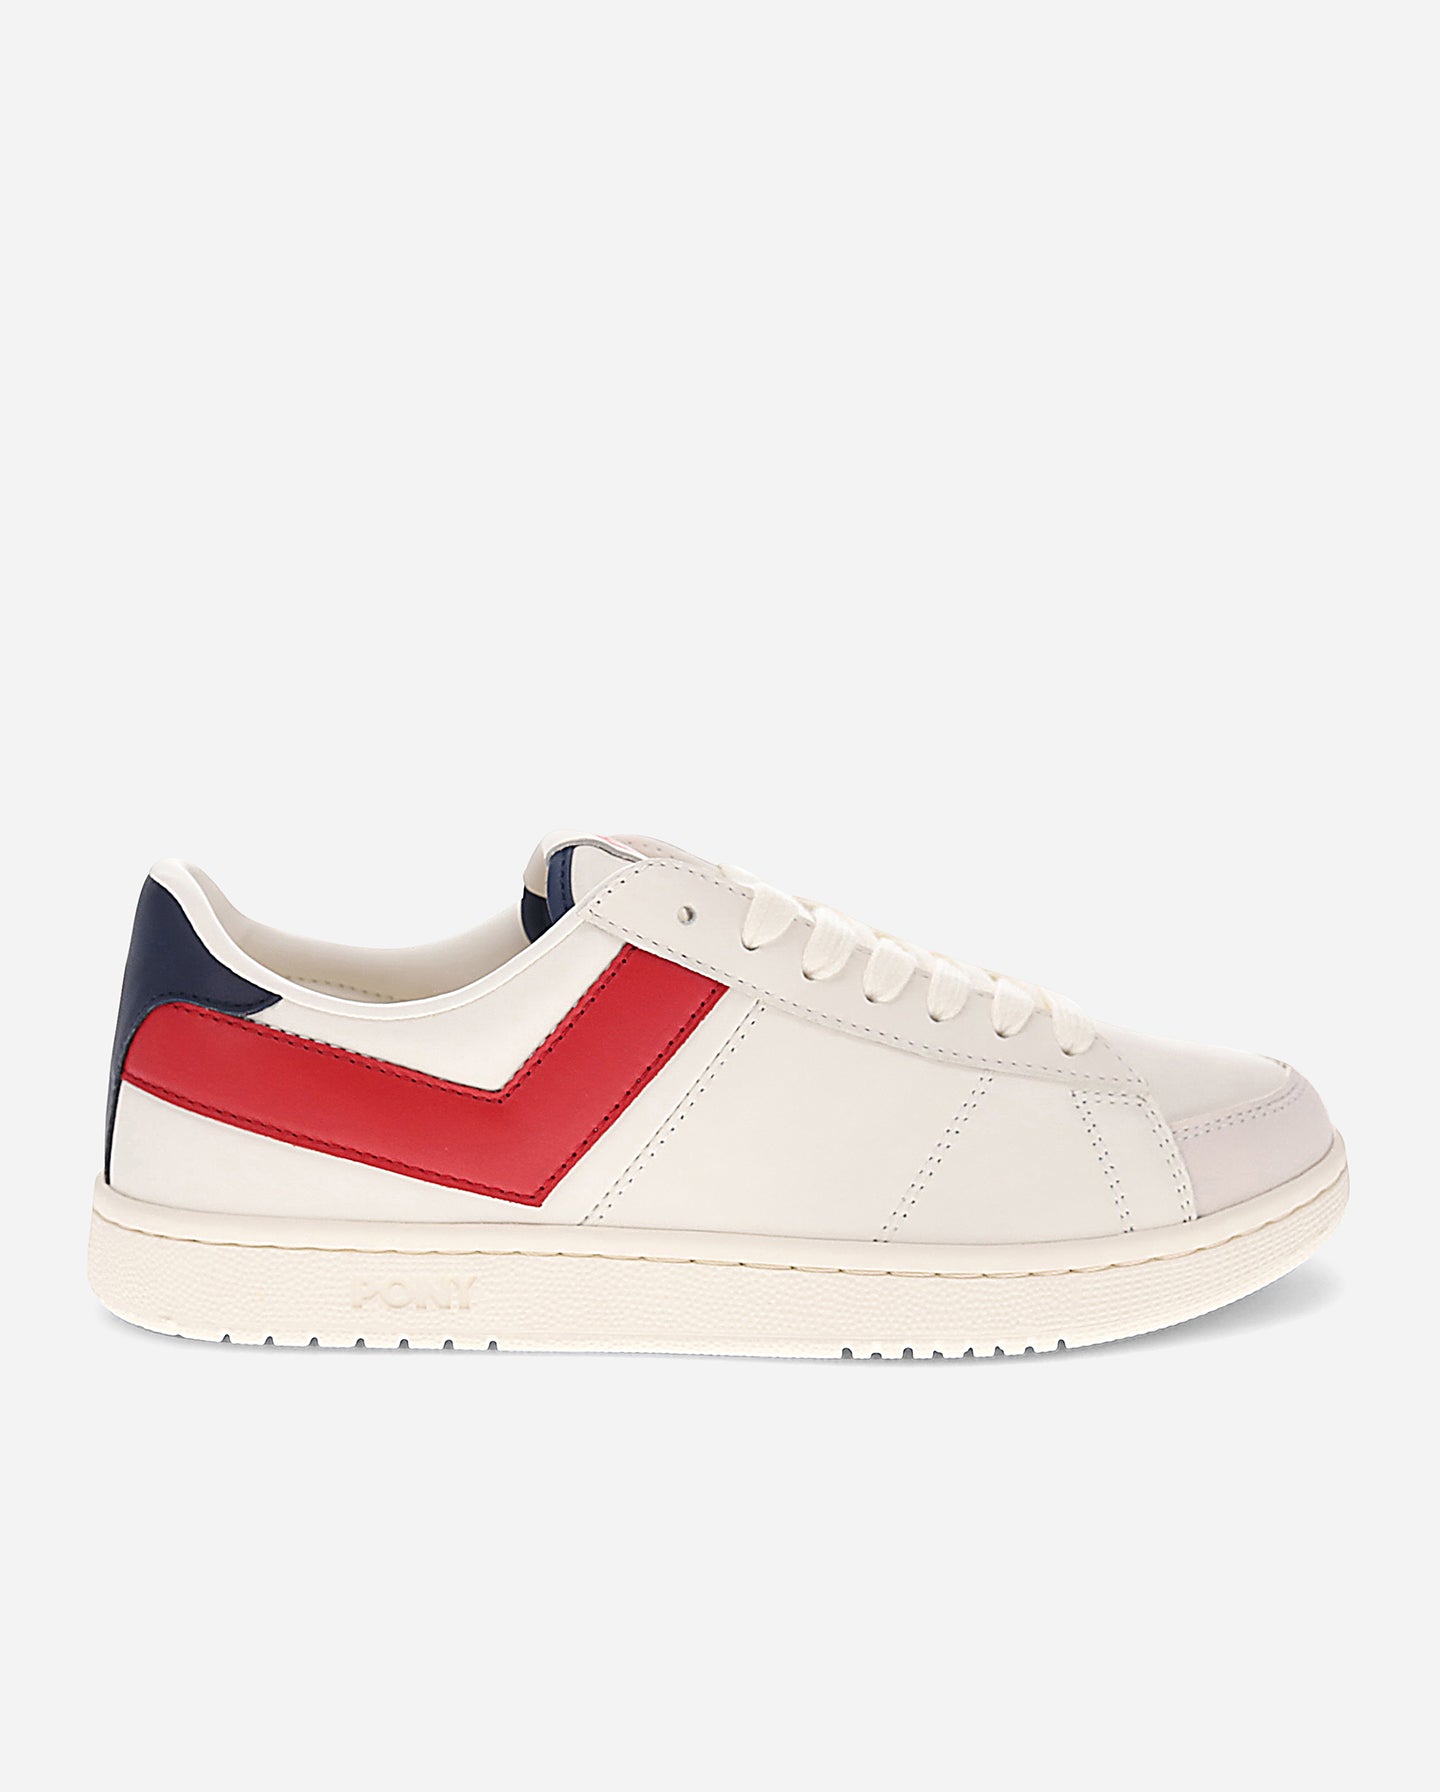 M-Pro in white/red/navy – (side/unisex)